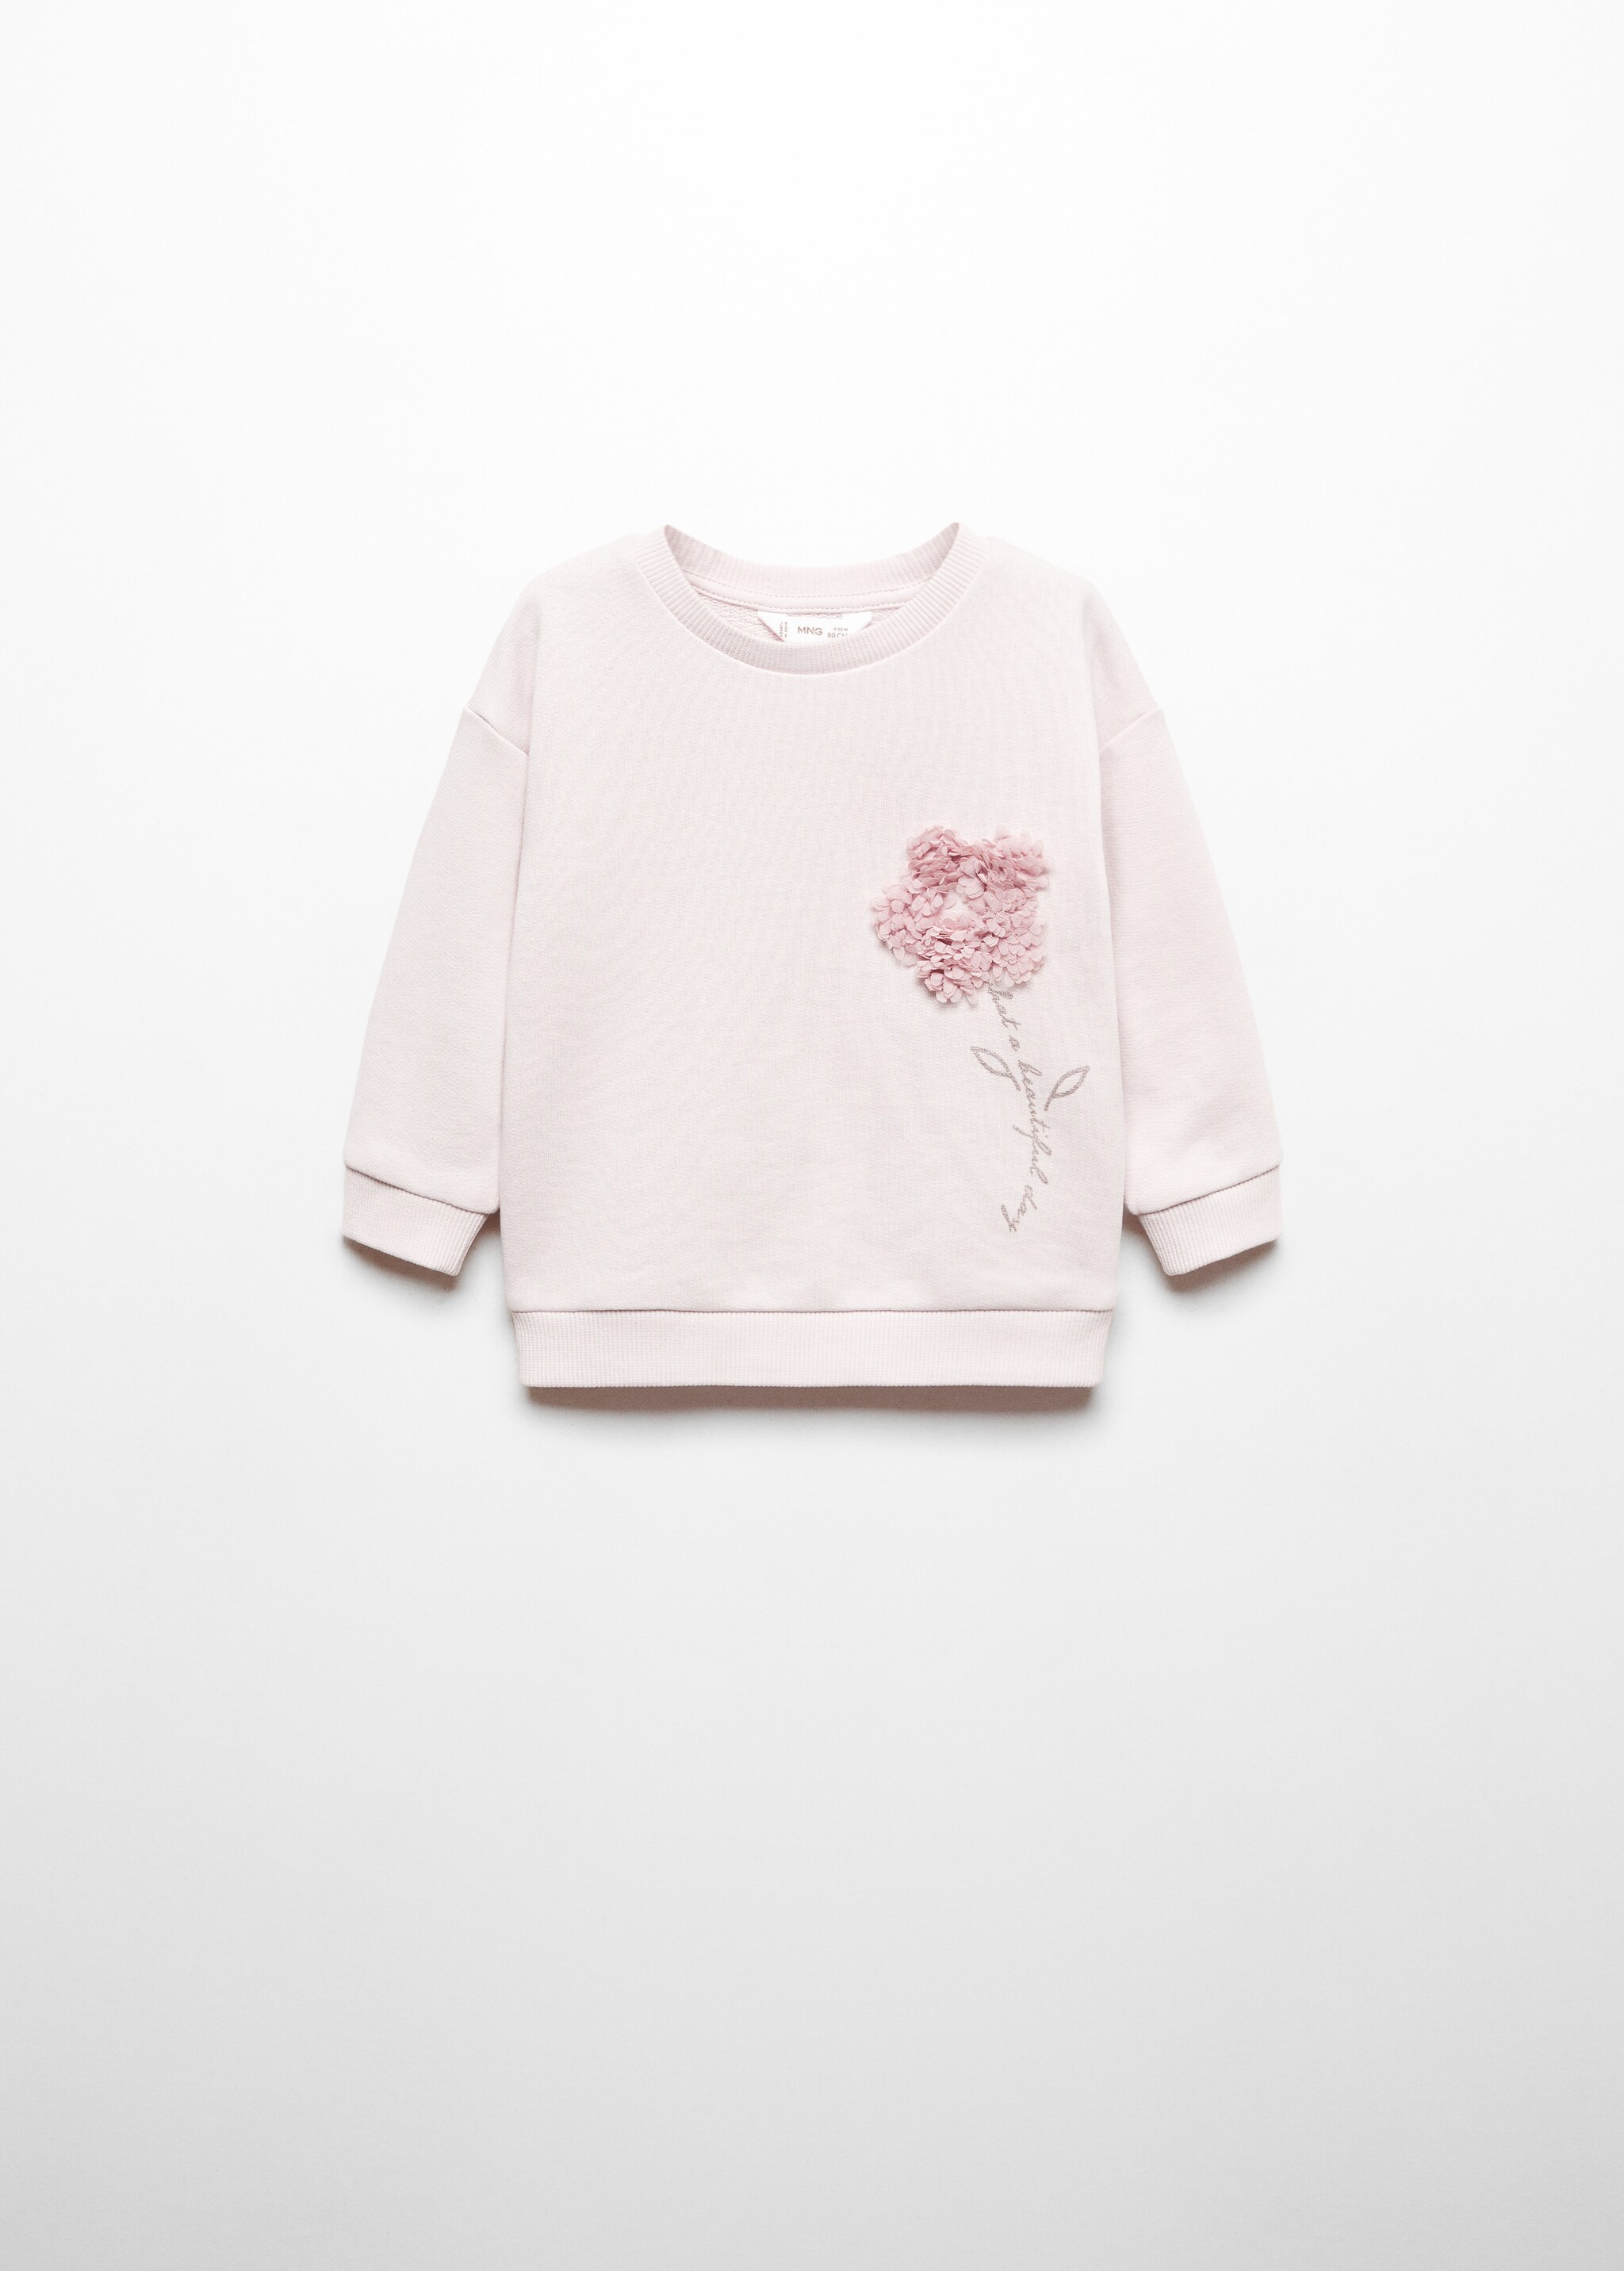 Embossed flower sweatshirt - Article without model